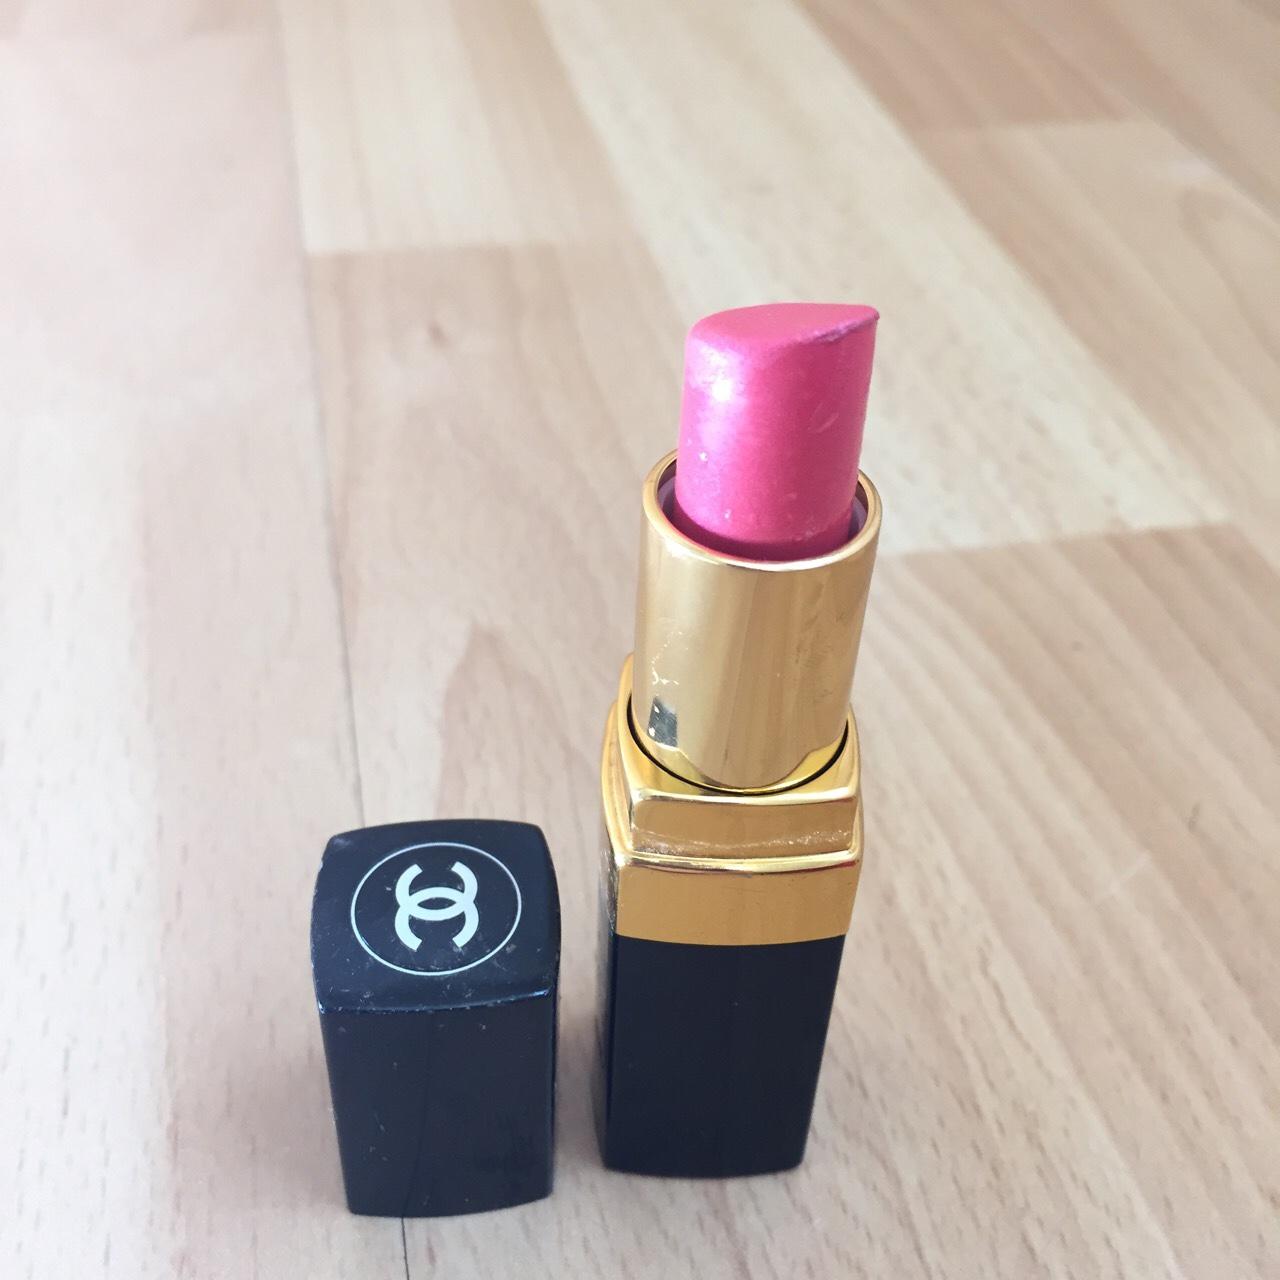 Chanel rouge coco 39 paradise lipstick. Used on a